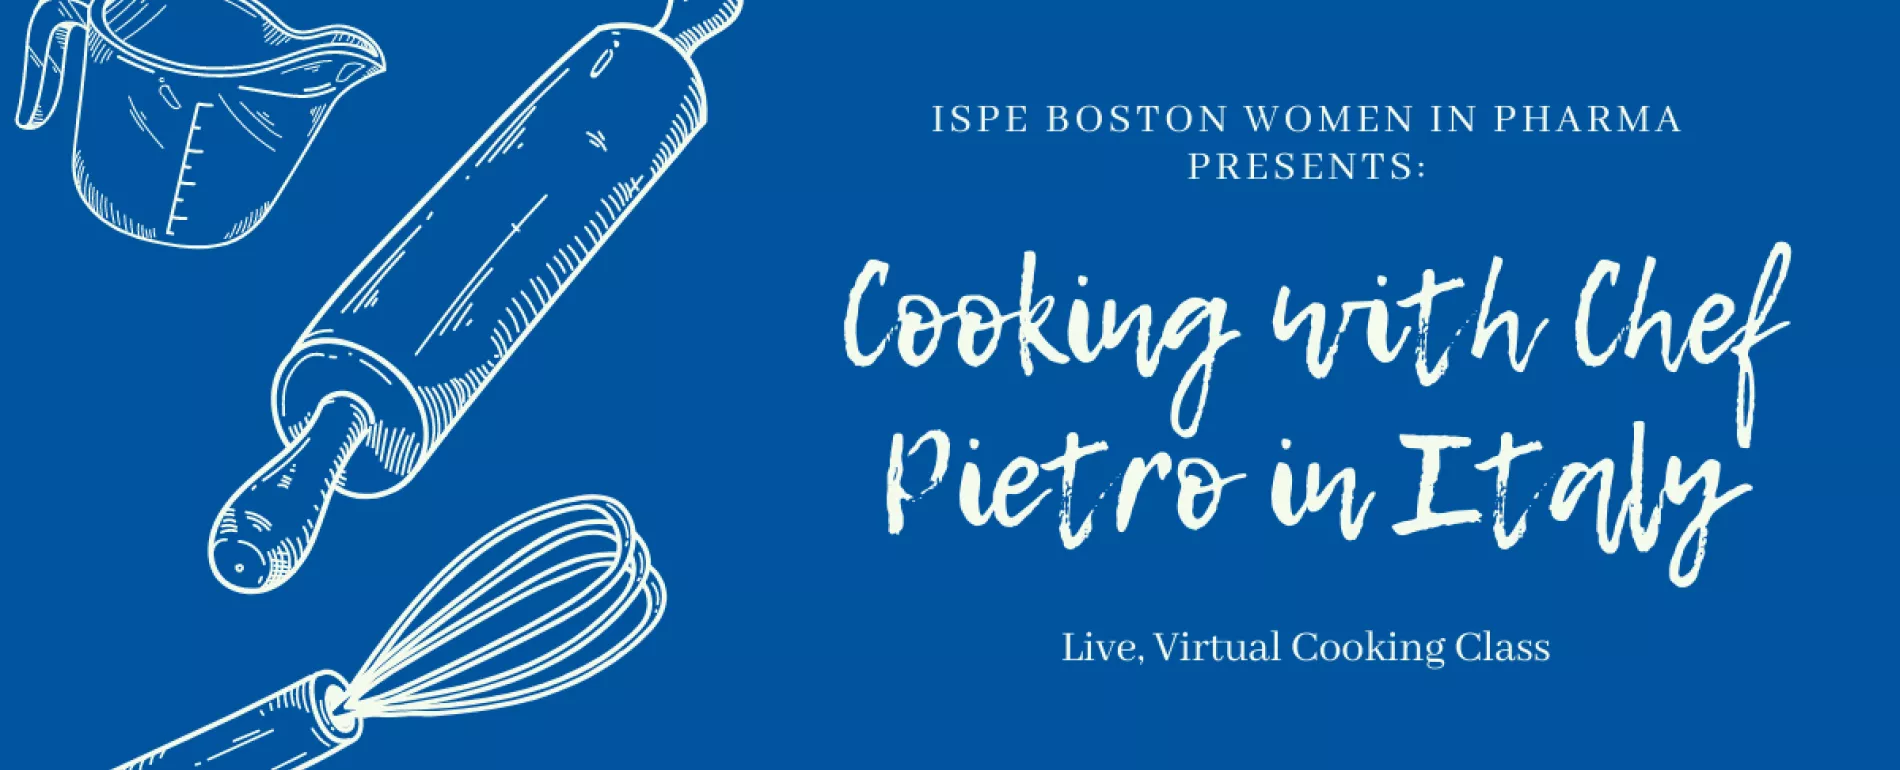 ISPE Women in Pharma Cooking with Chef Pietro in Italy